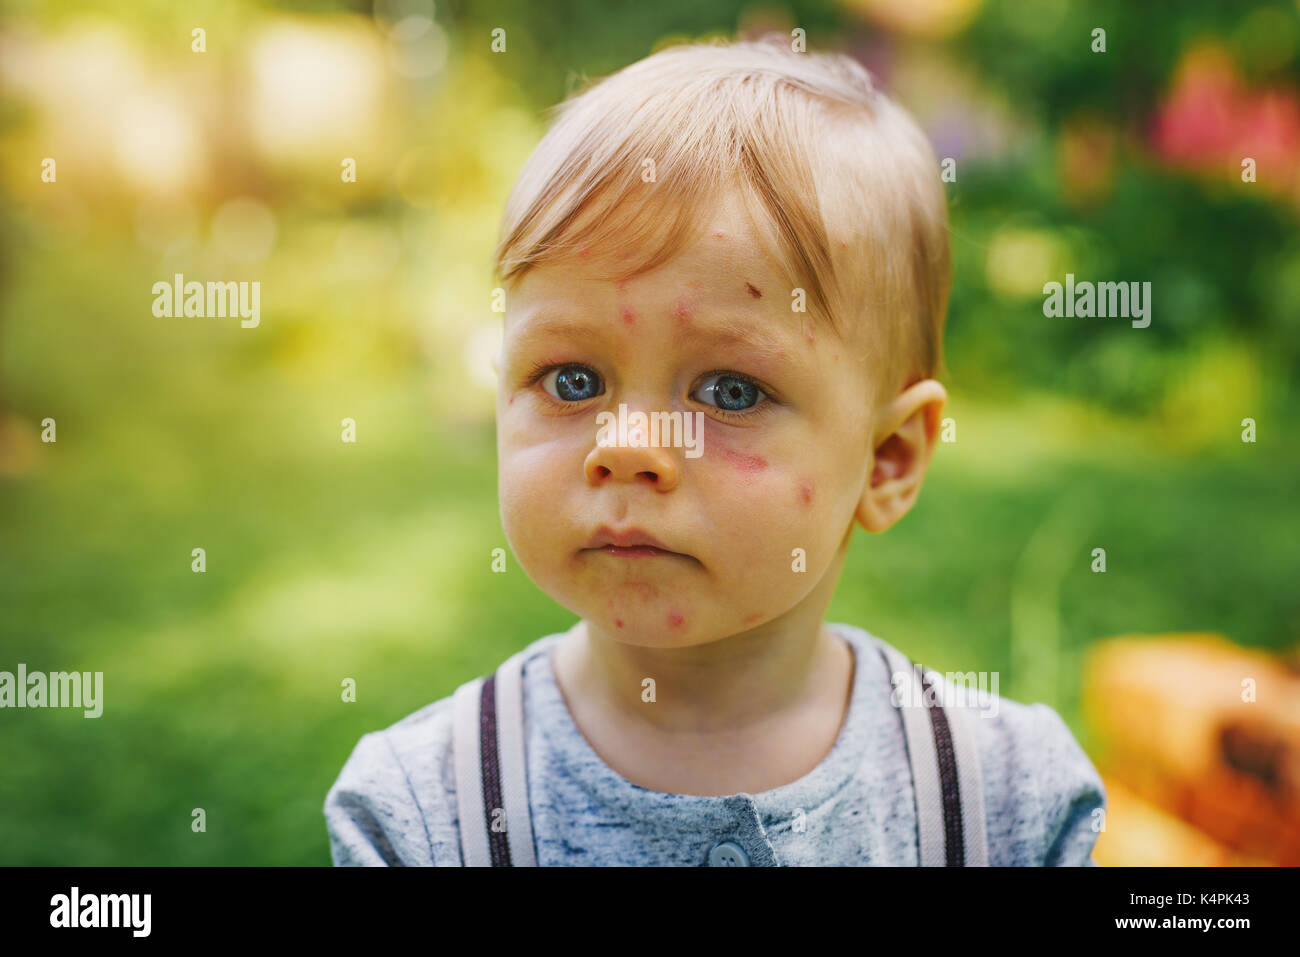 One year unhappy child with allergy and insect bites on face. Portrait in summer garden. Stock Photo